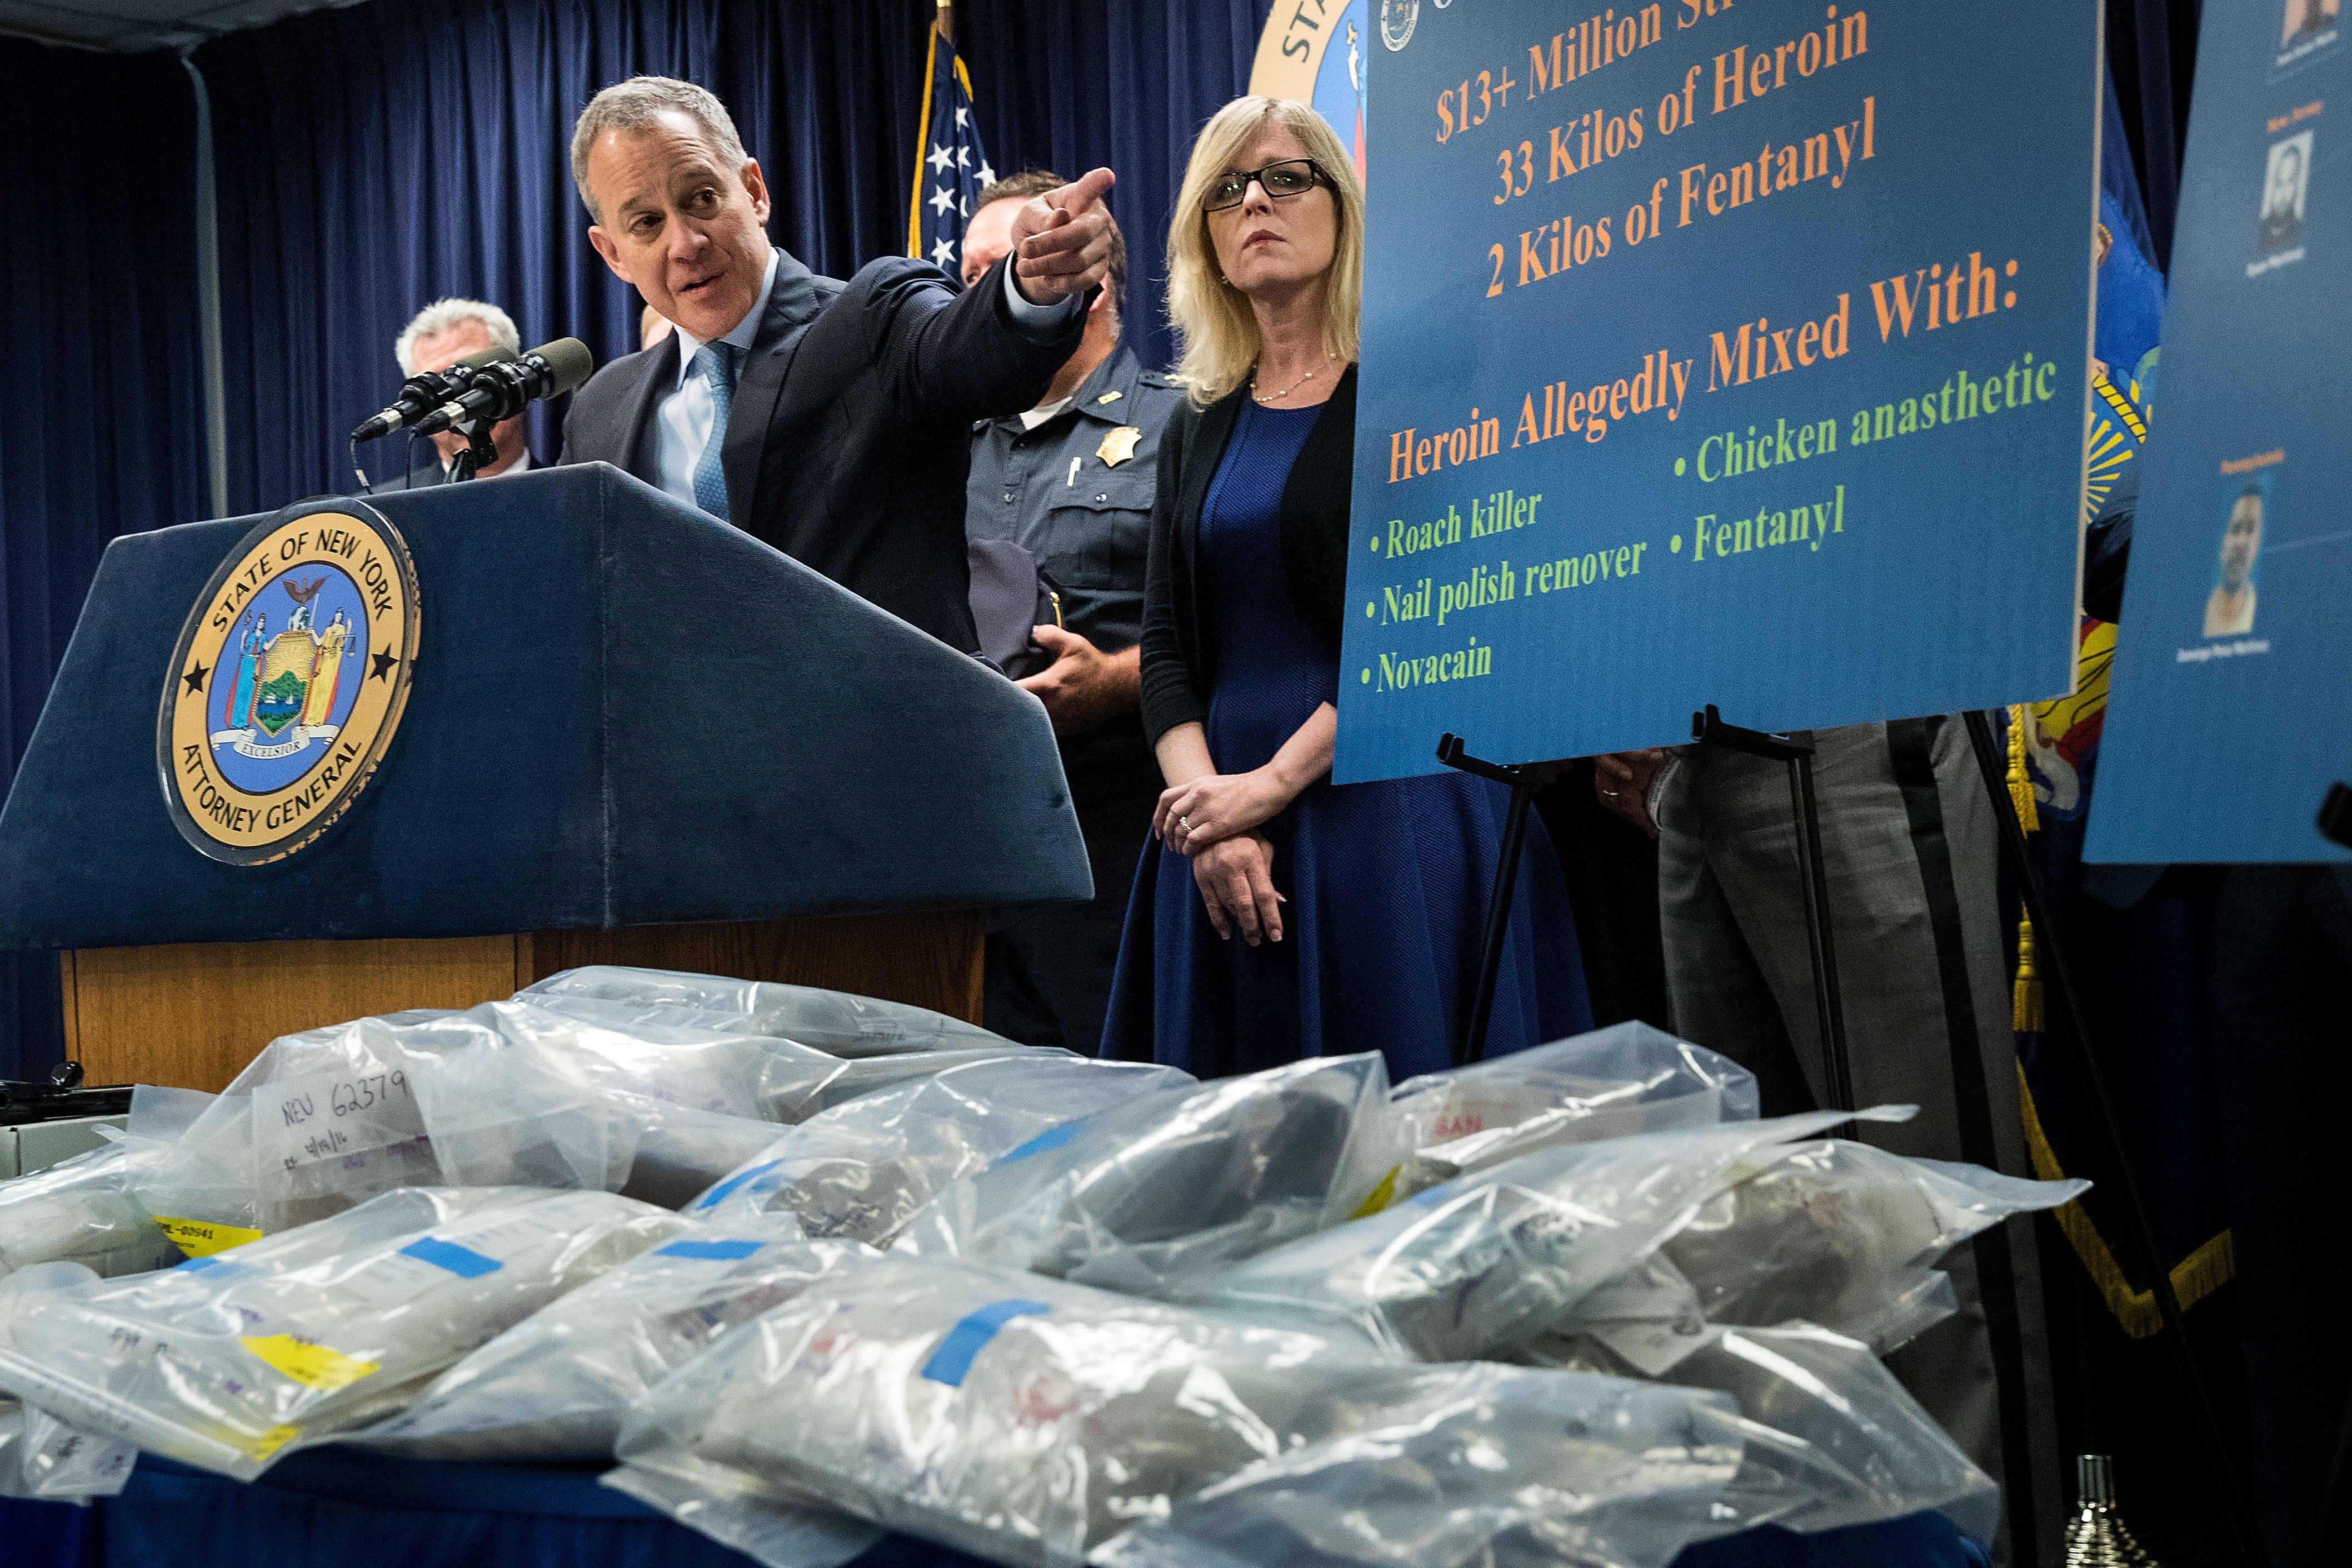 New York Attorney General Eric Schneiderman speaks during a press conference regarding a major drug bust, at the office of the New York Attorney General, September 23, 2016 in New York City. (Photo by Drew Angerer/Getty Images)